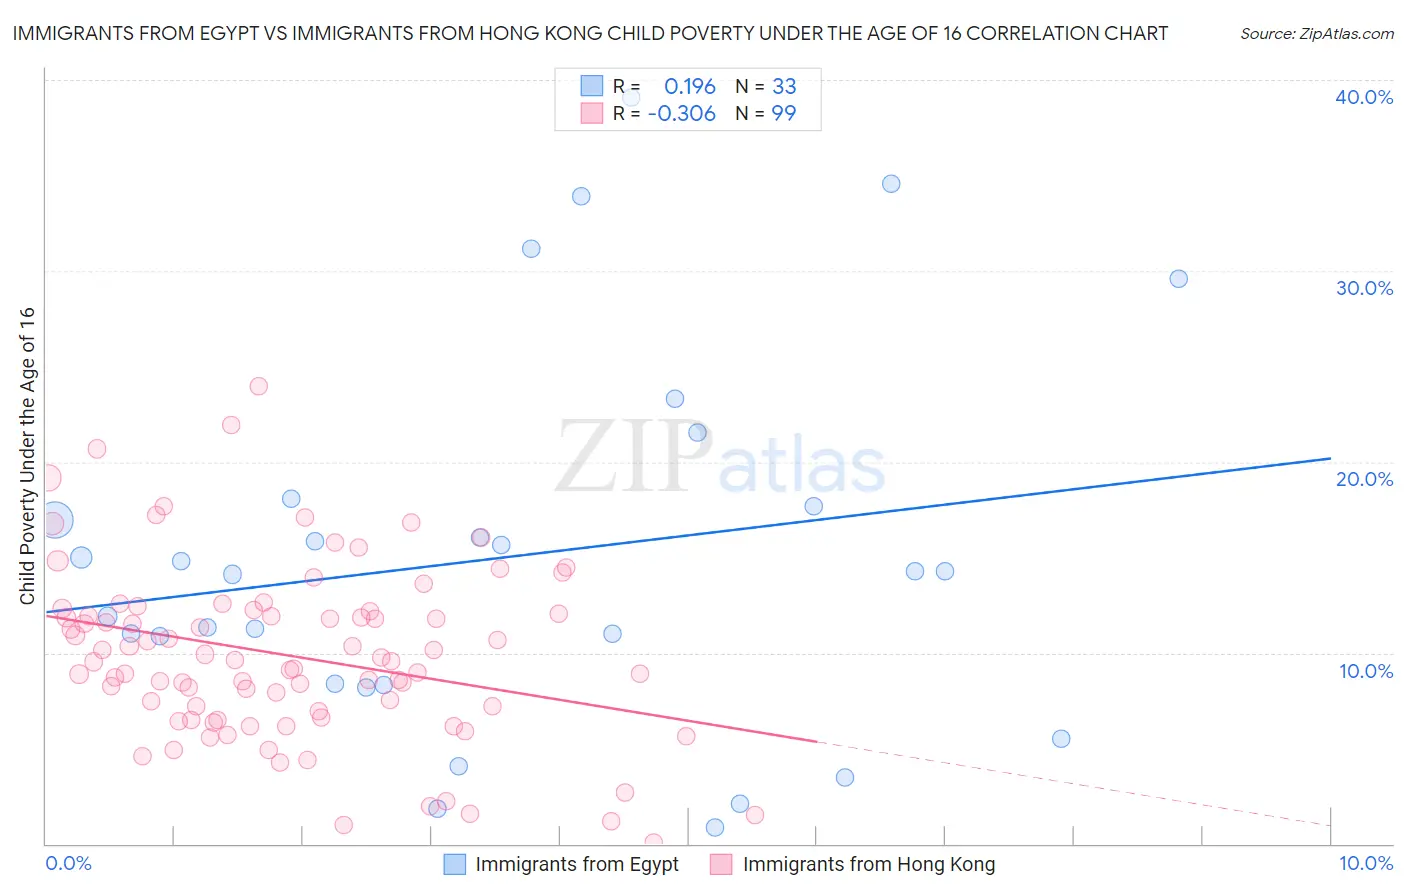 Immigrants from Egypt vs Immigrants from Hong Kong Child Poverty Under the Age of 16